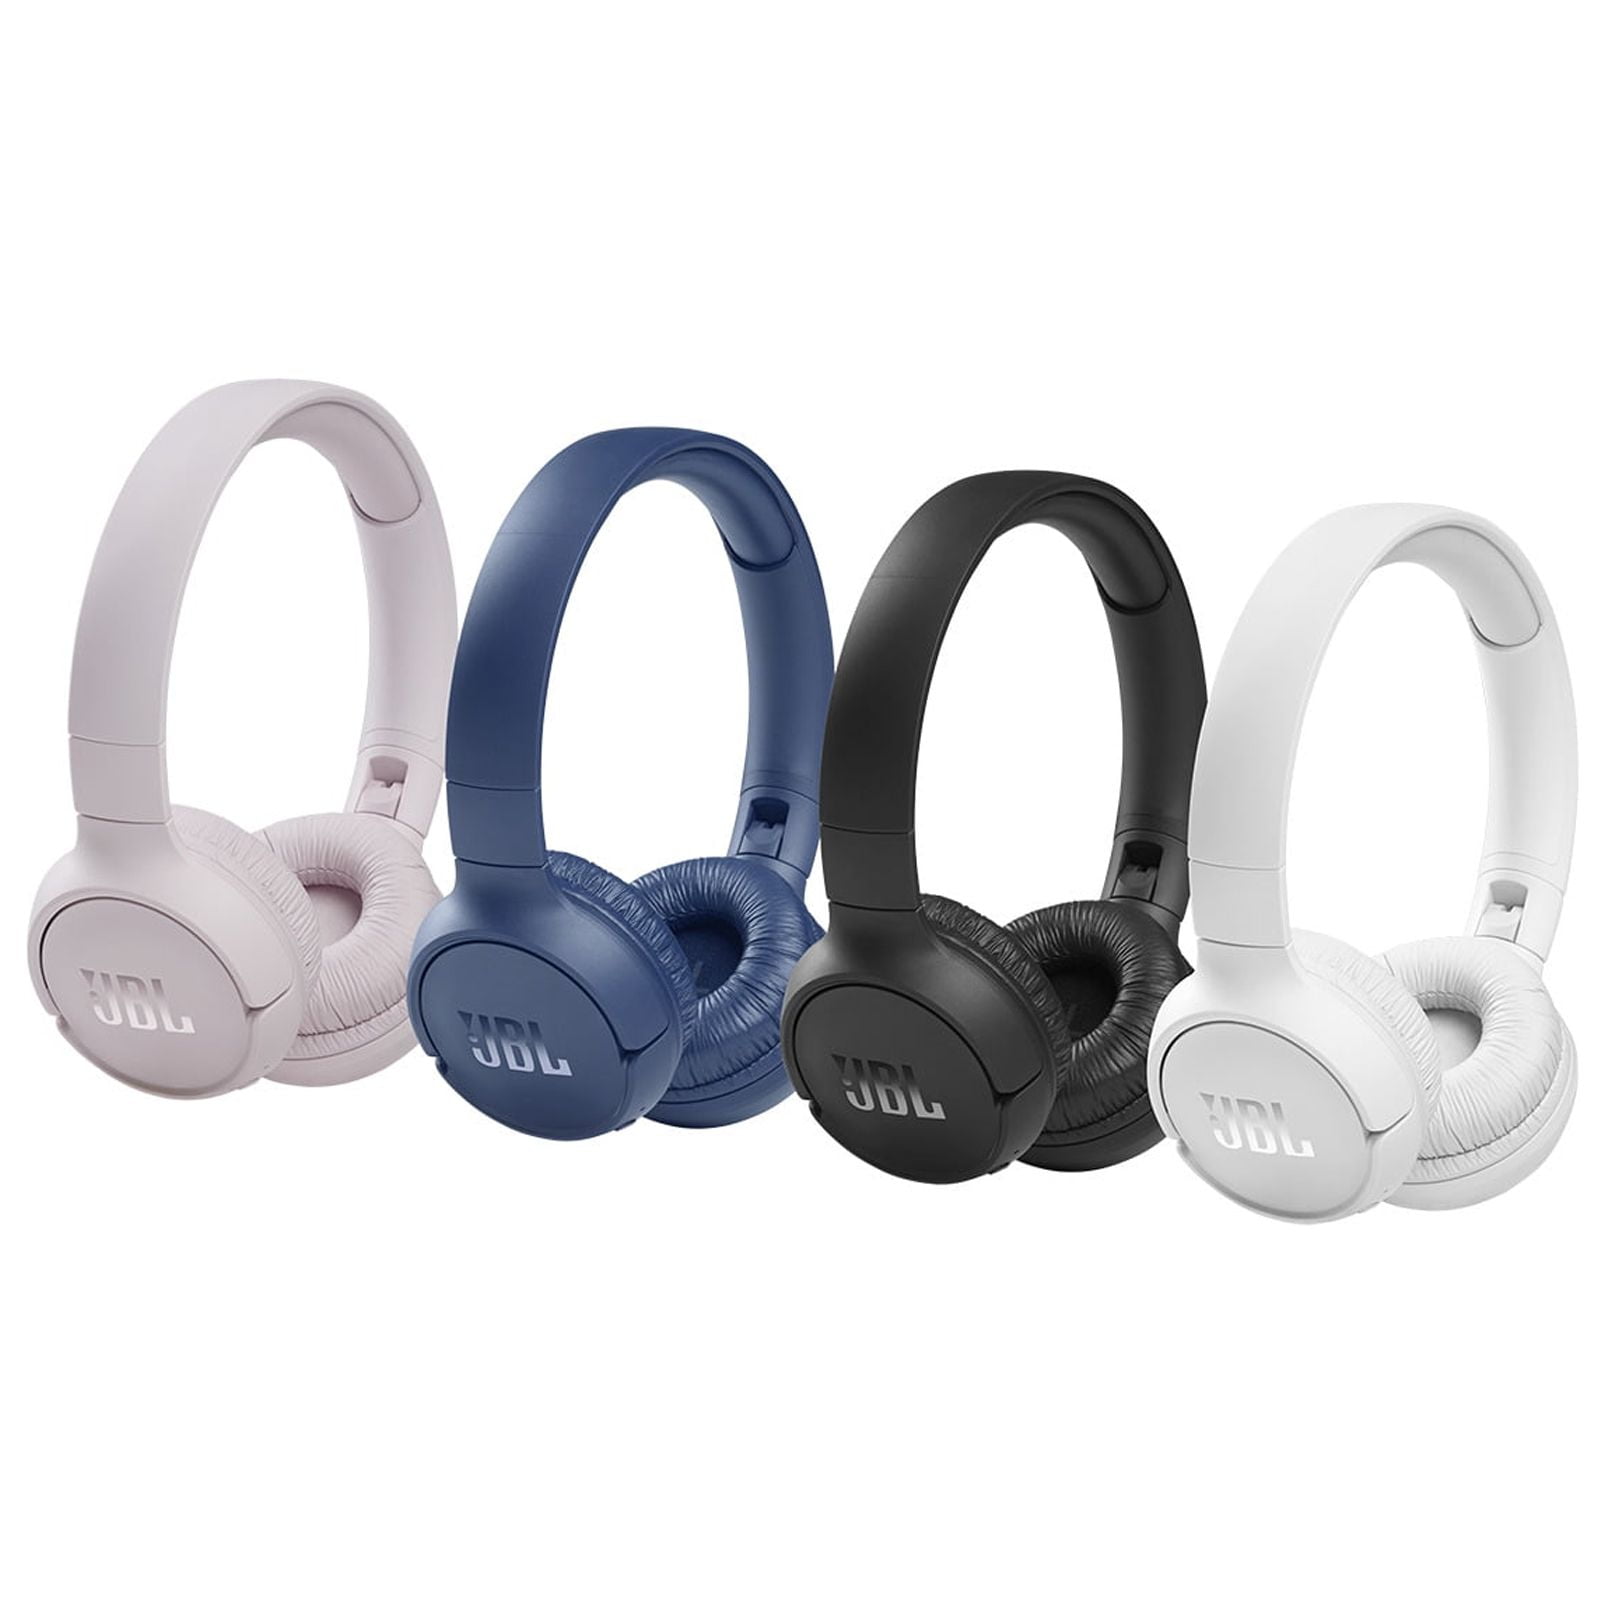 Don't Pay $50, Get JBL Tune 510BT Wireless On-Ear Headphones for $24.95 -  Today Only - TechEBlog